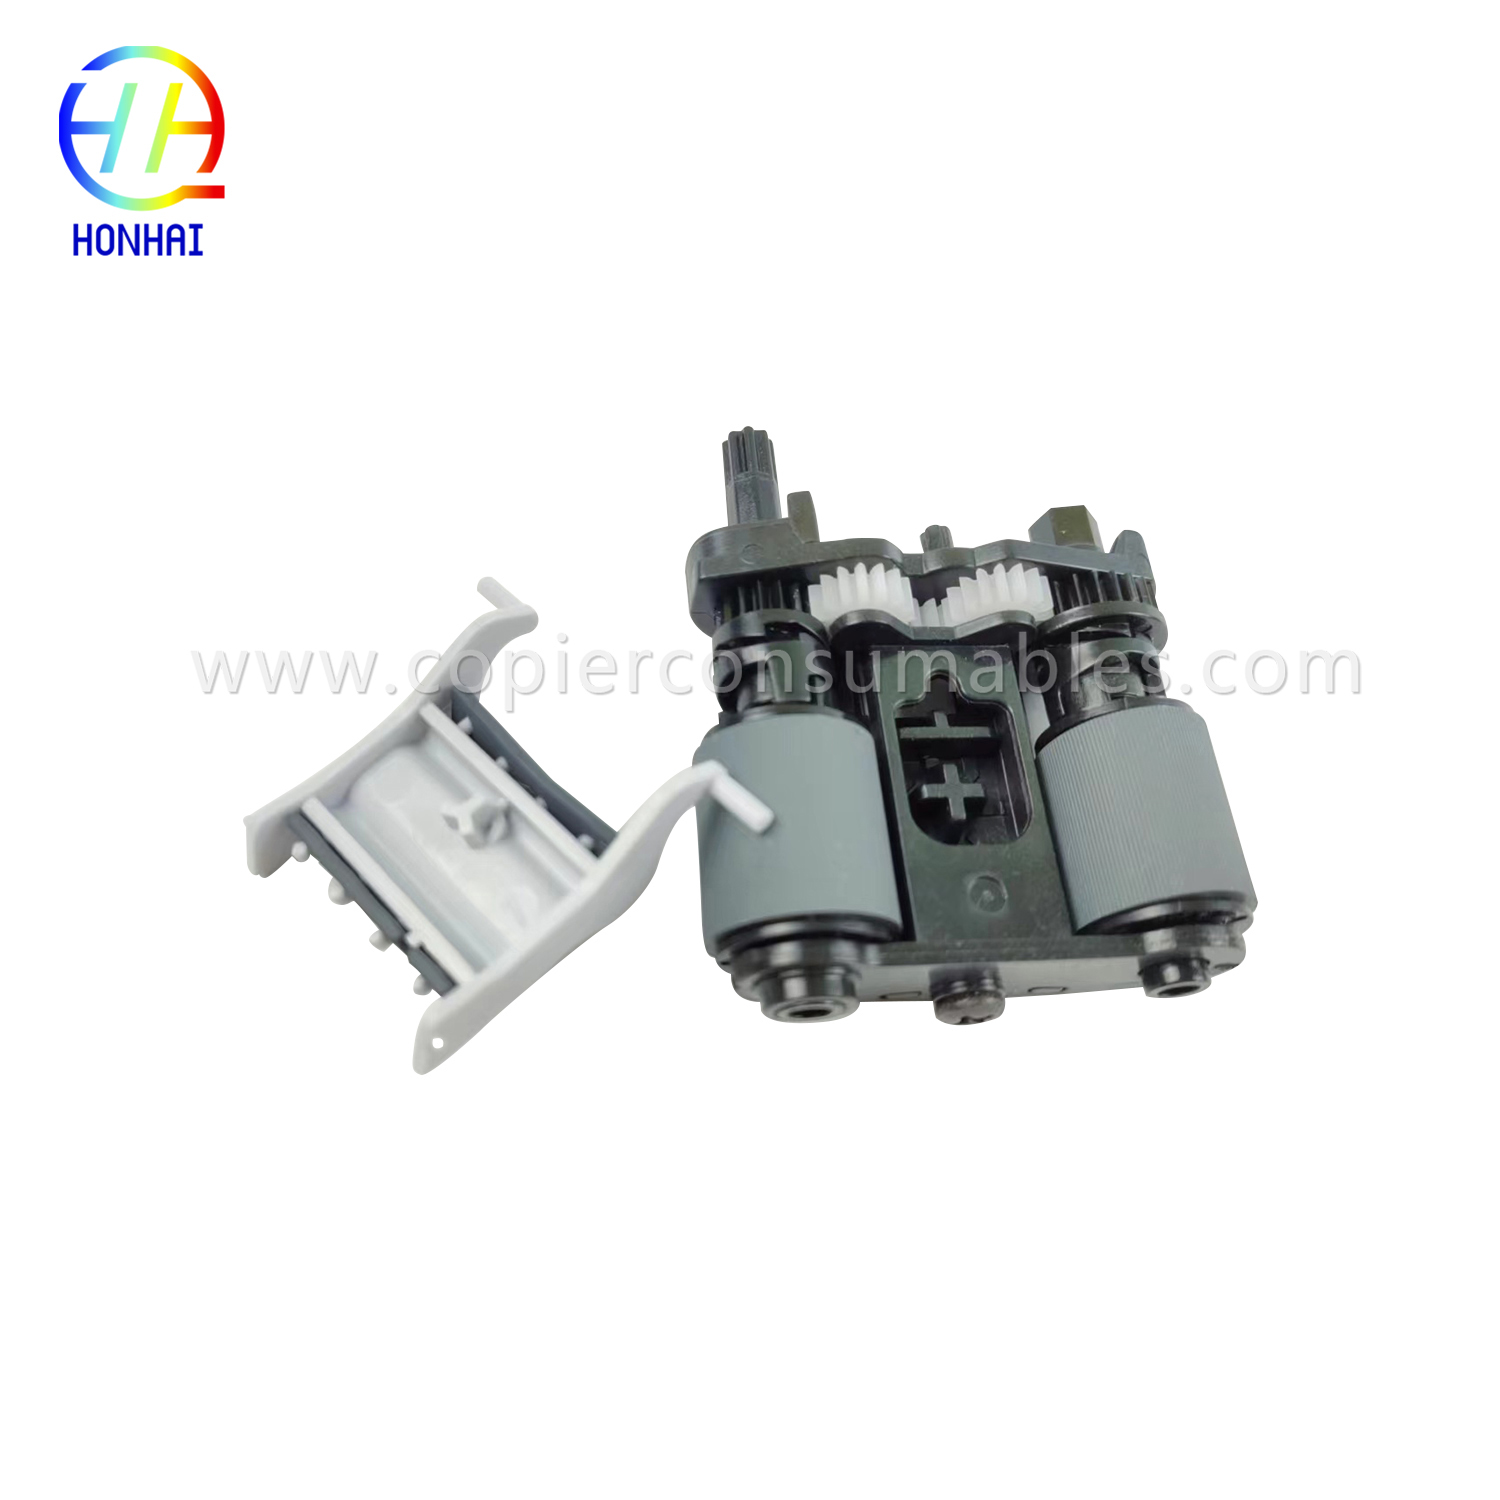 I-ADF Pickup Roller Assembly ye-HP Color LaserJet Pro MFP M281fdw M377dw M477fdn M477fdw M477fnw M426fdn M426fdw B3Q10-60105